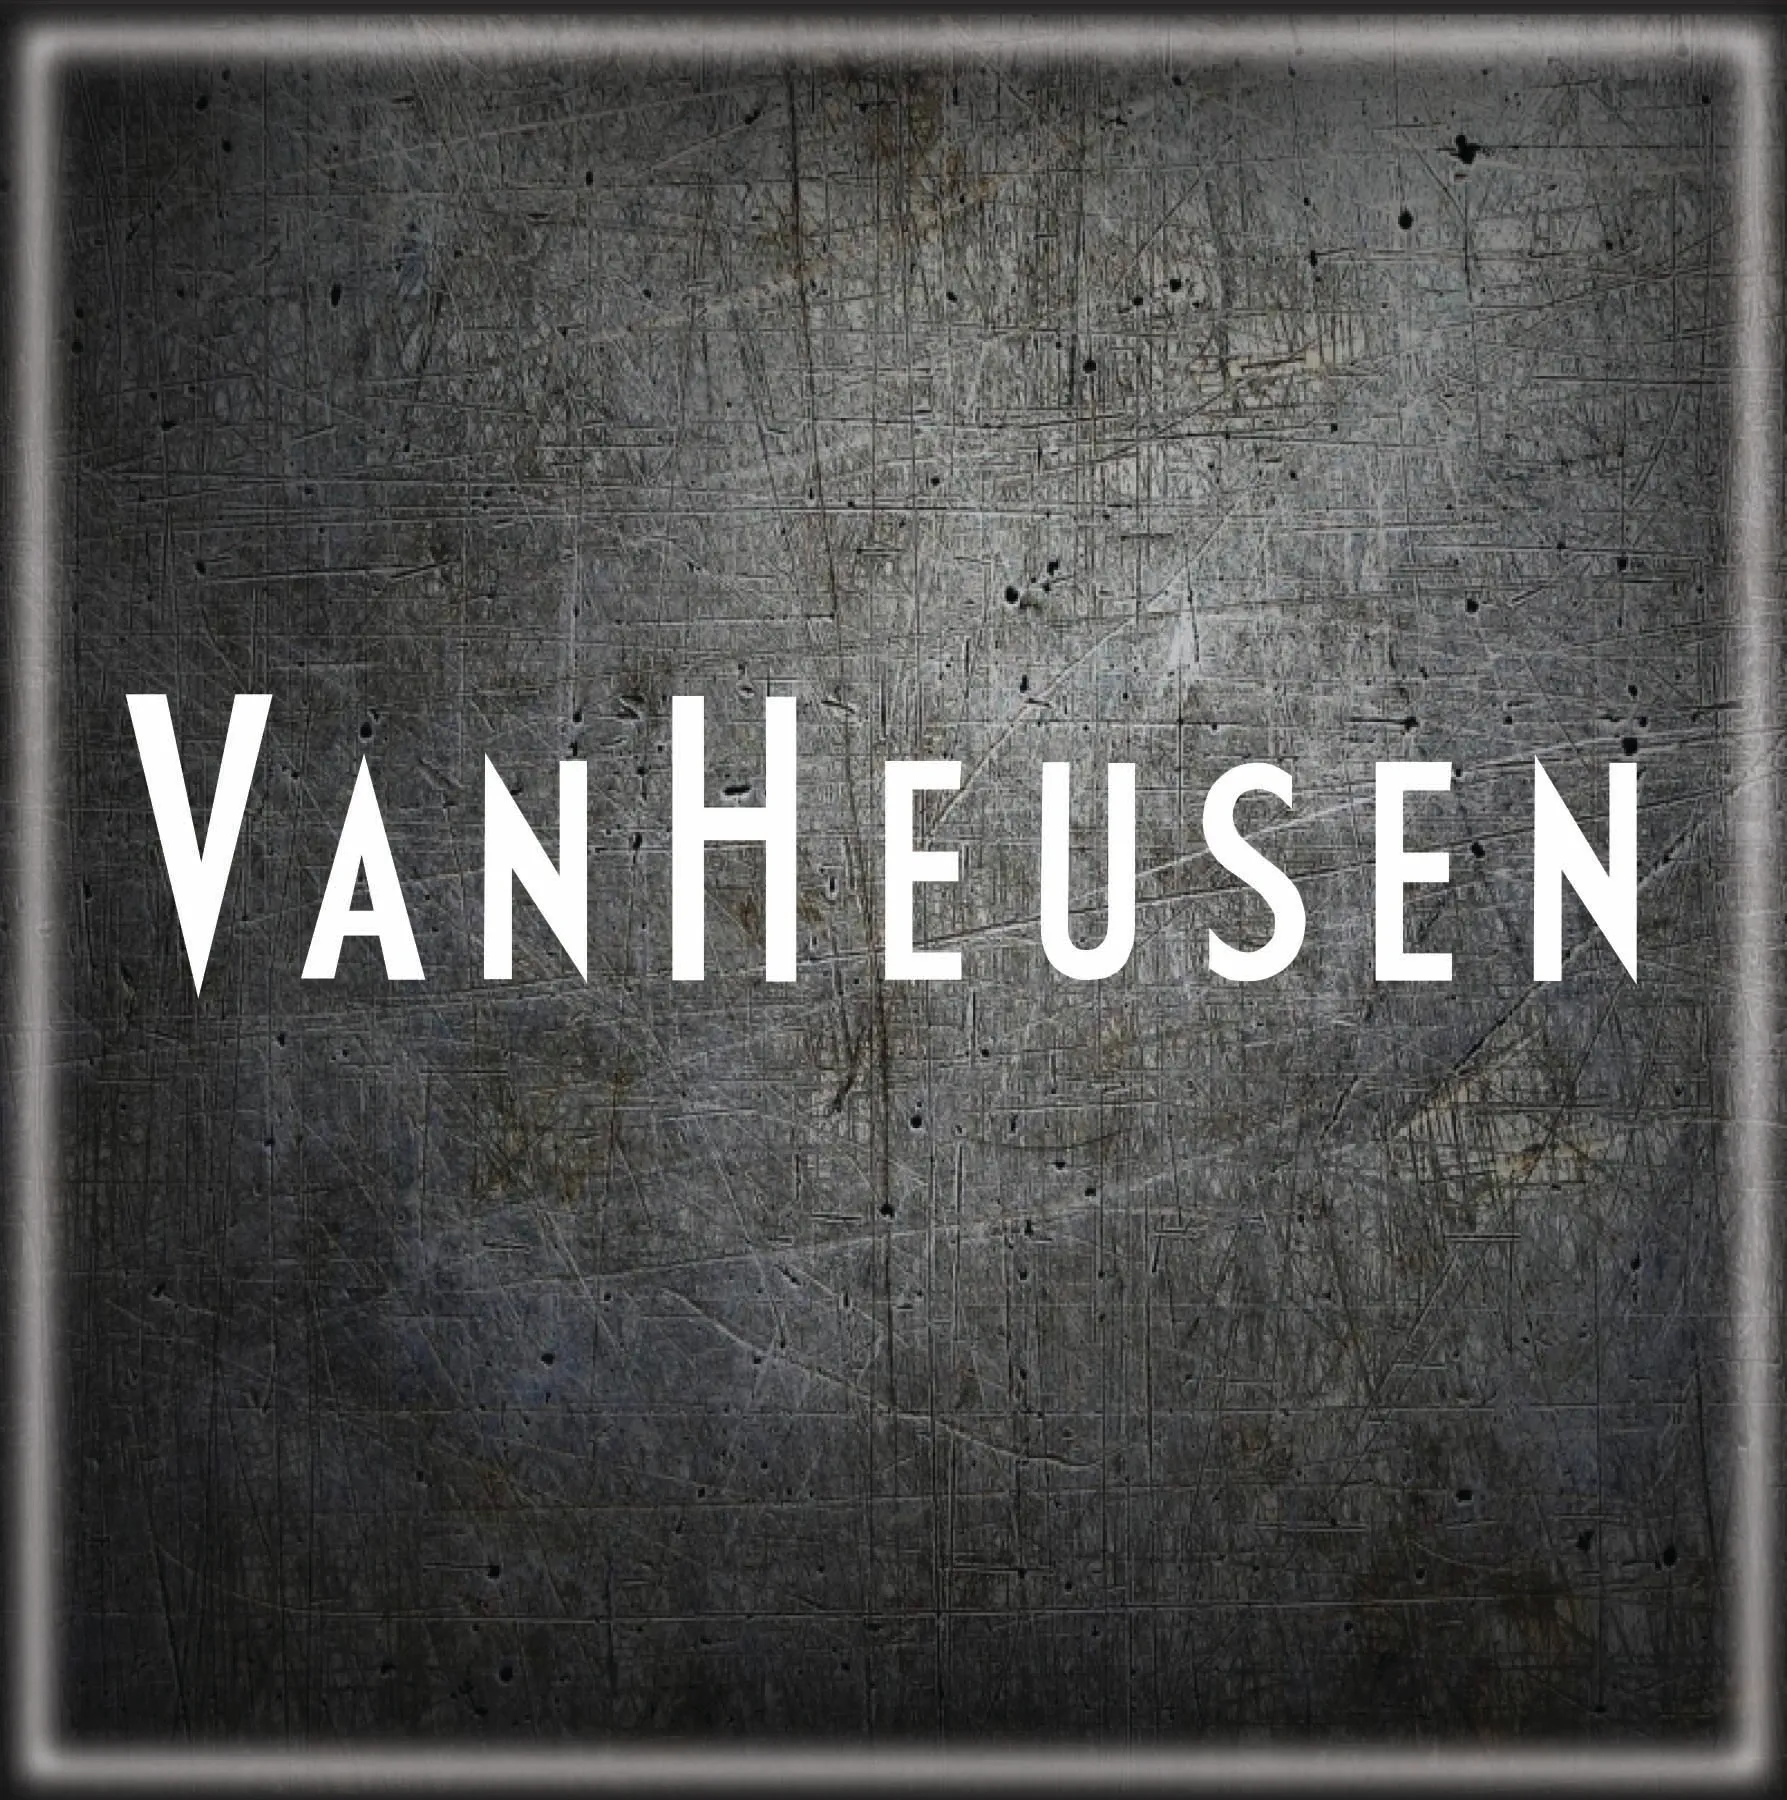 A picture of the word vanheusen on a wall.